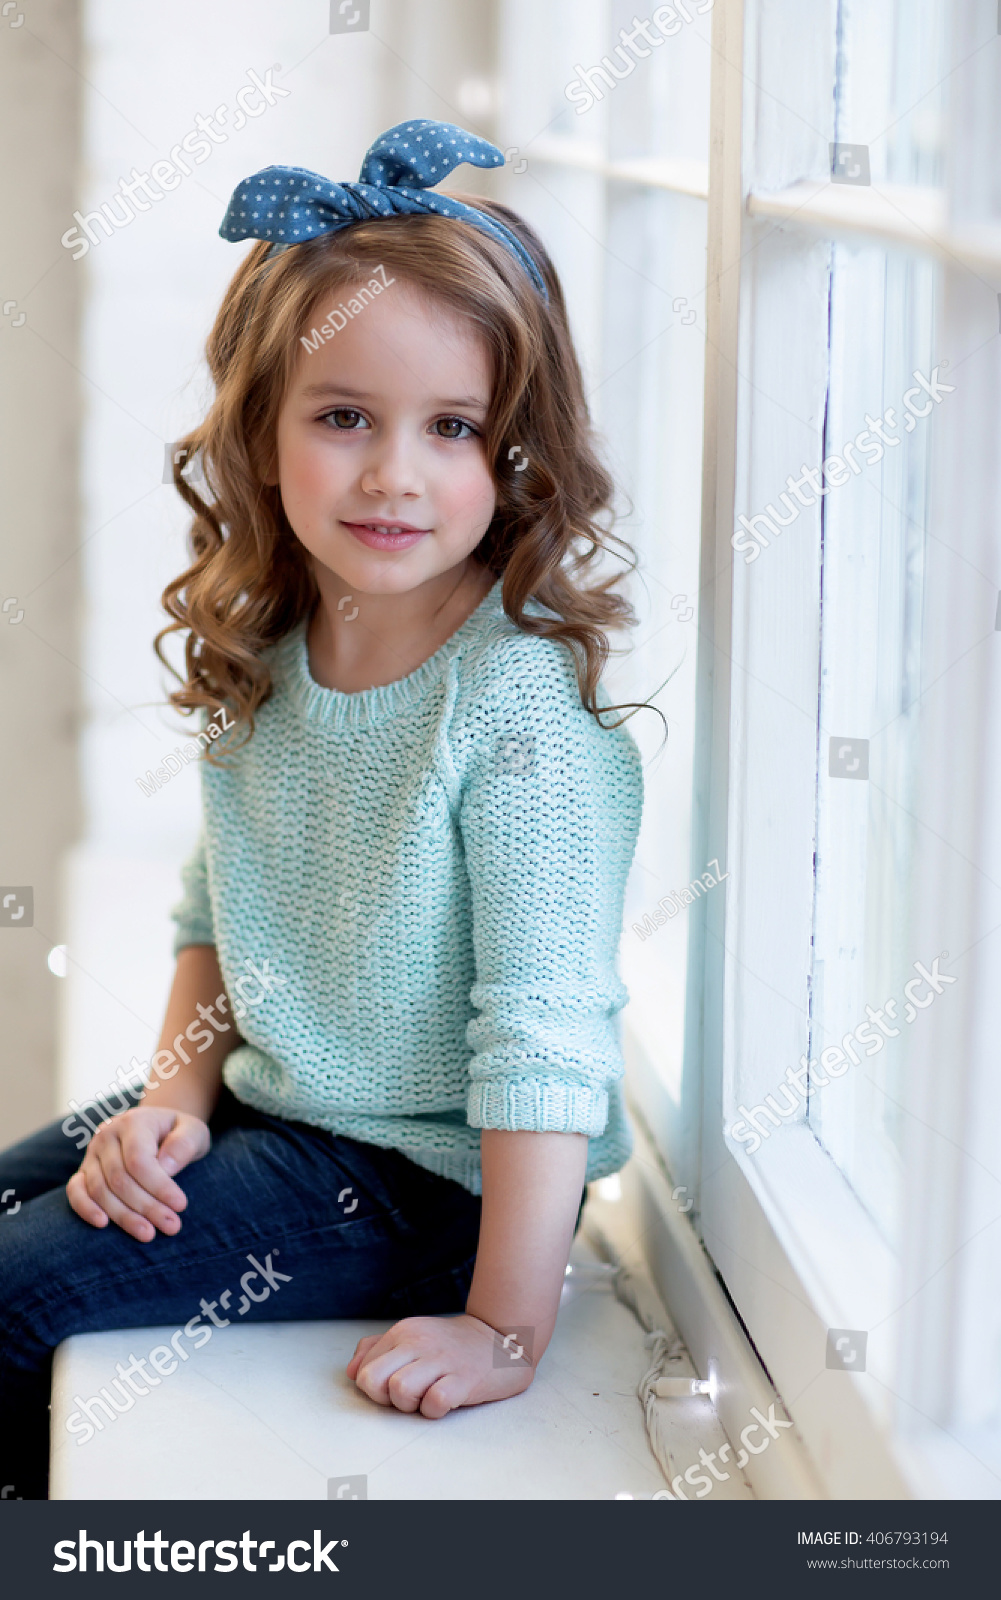 Beautiful Girl Curly Hair Sits On Stock Photo 406793194 - Shutterstock